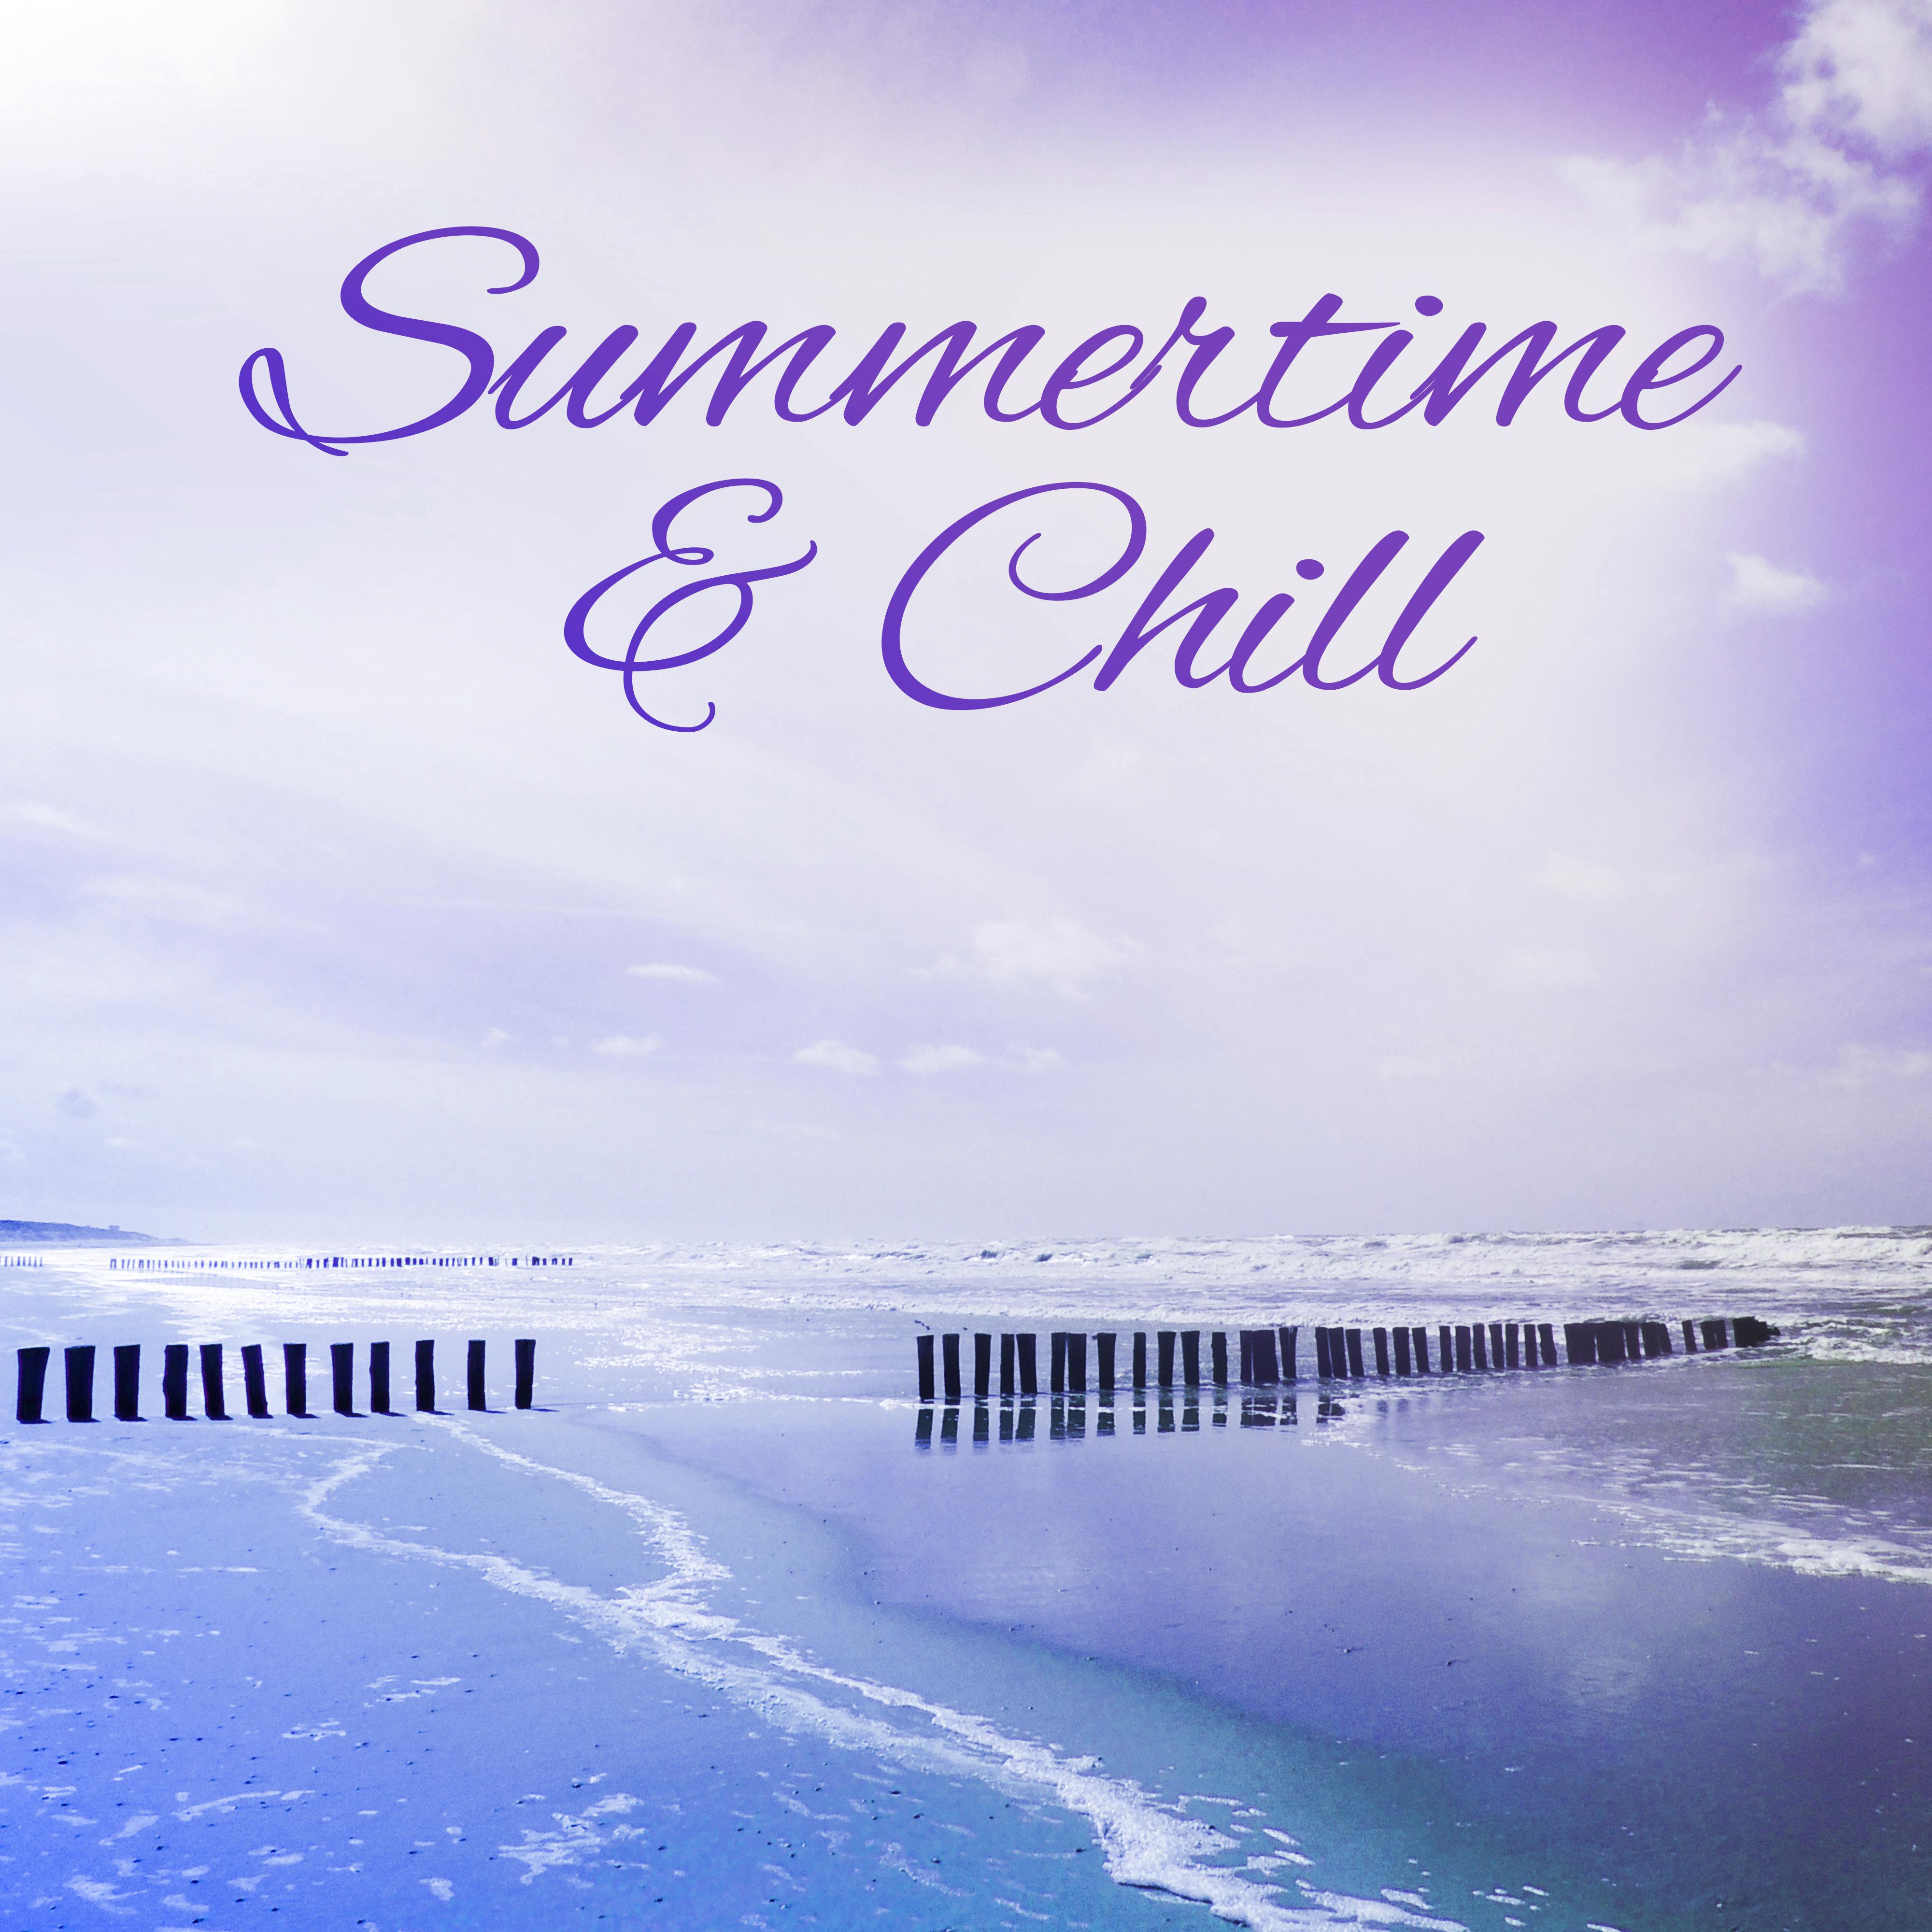 Summertime & Chill – Oasis of Calmness, Beach Chill, Deep Relaxation, Keep Calm, Relaxing Music, Stress Free, Holiday Chill Out Music